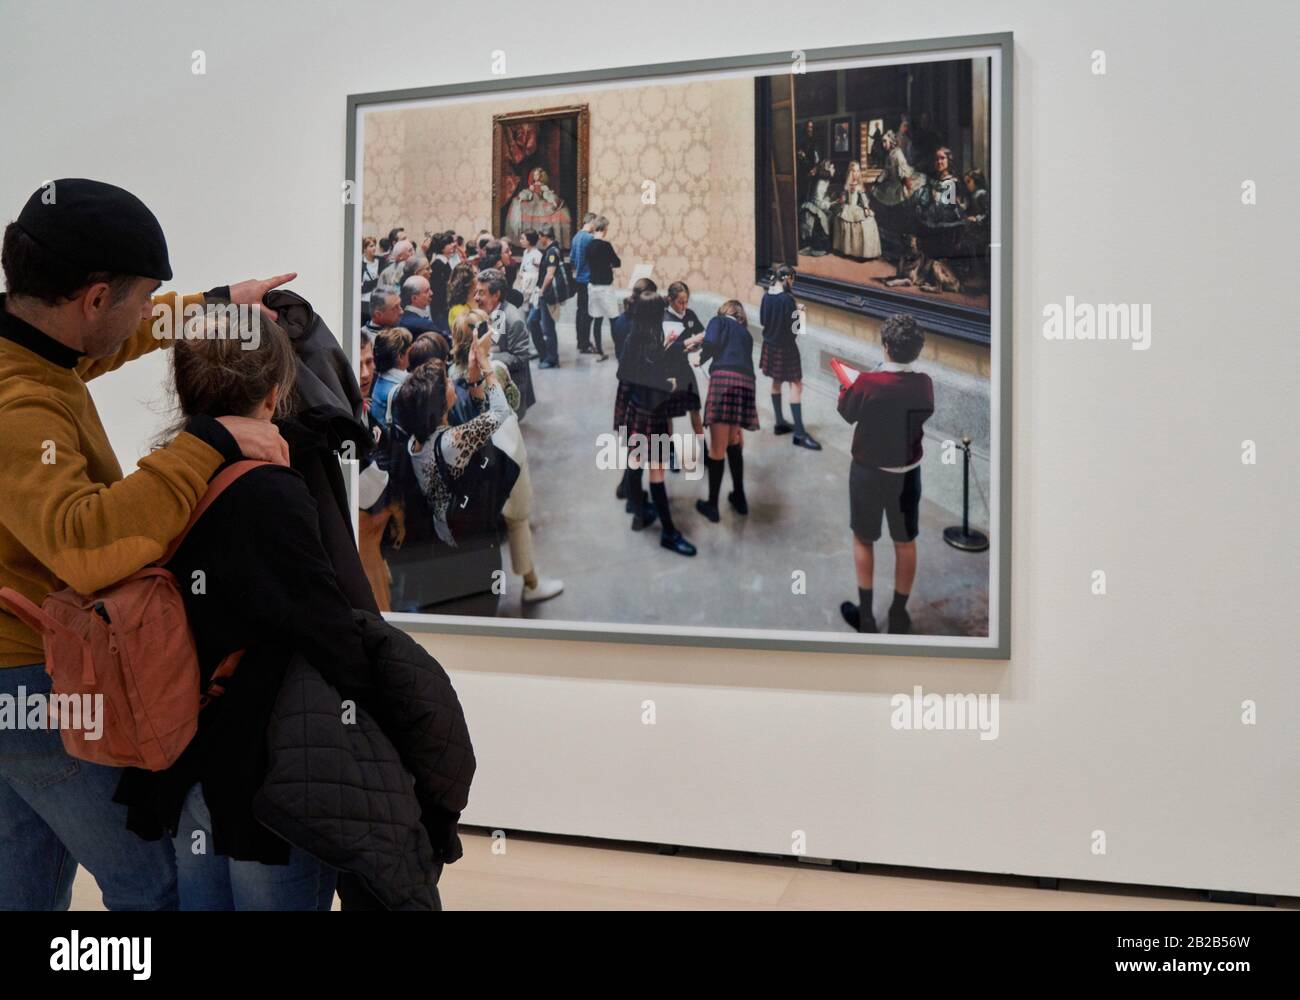 Thomas struth High Resolution Stock Photography and Images - Alamy